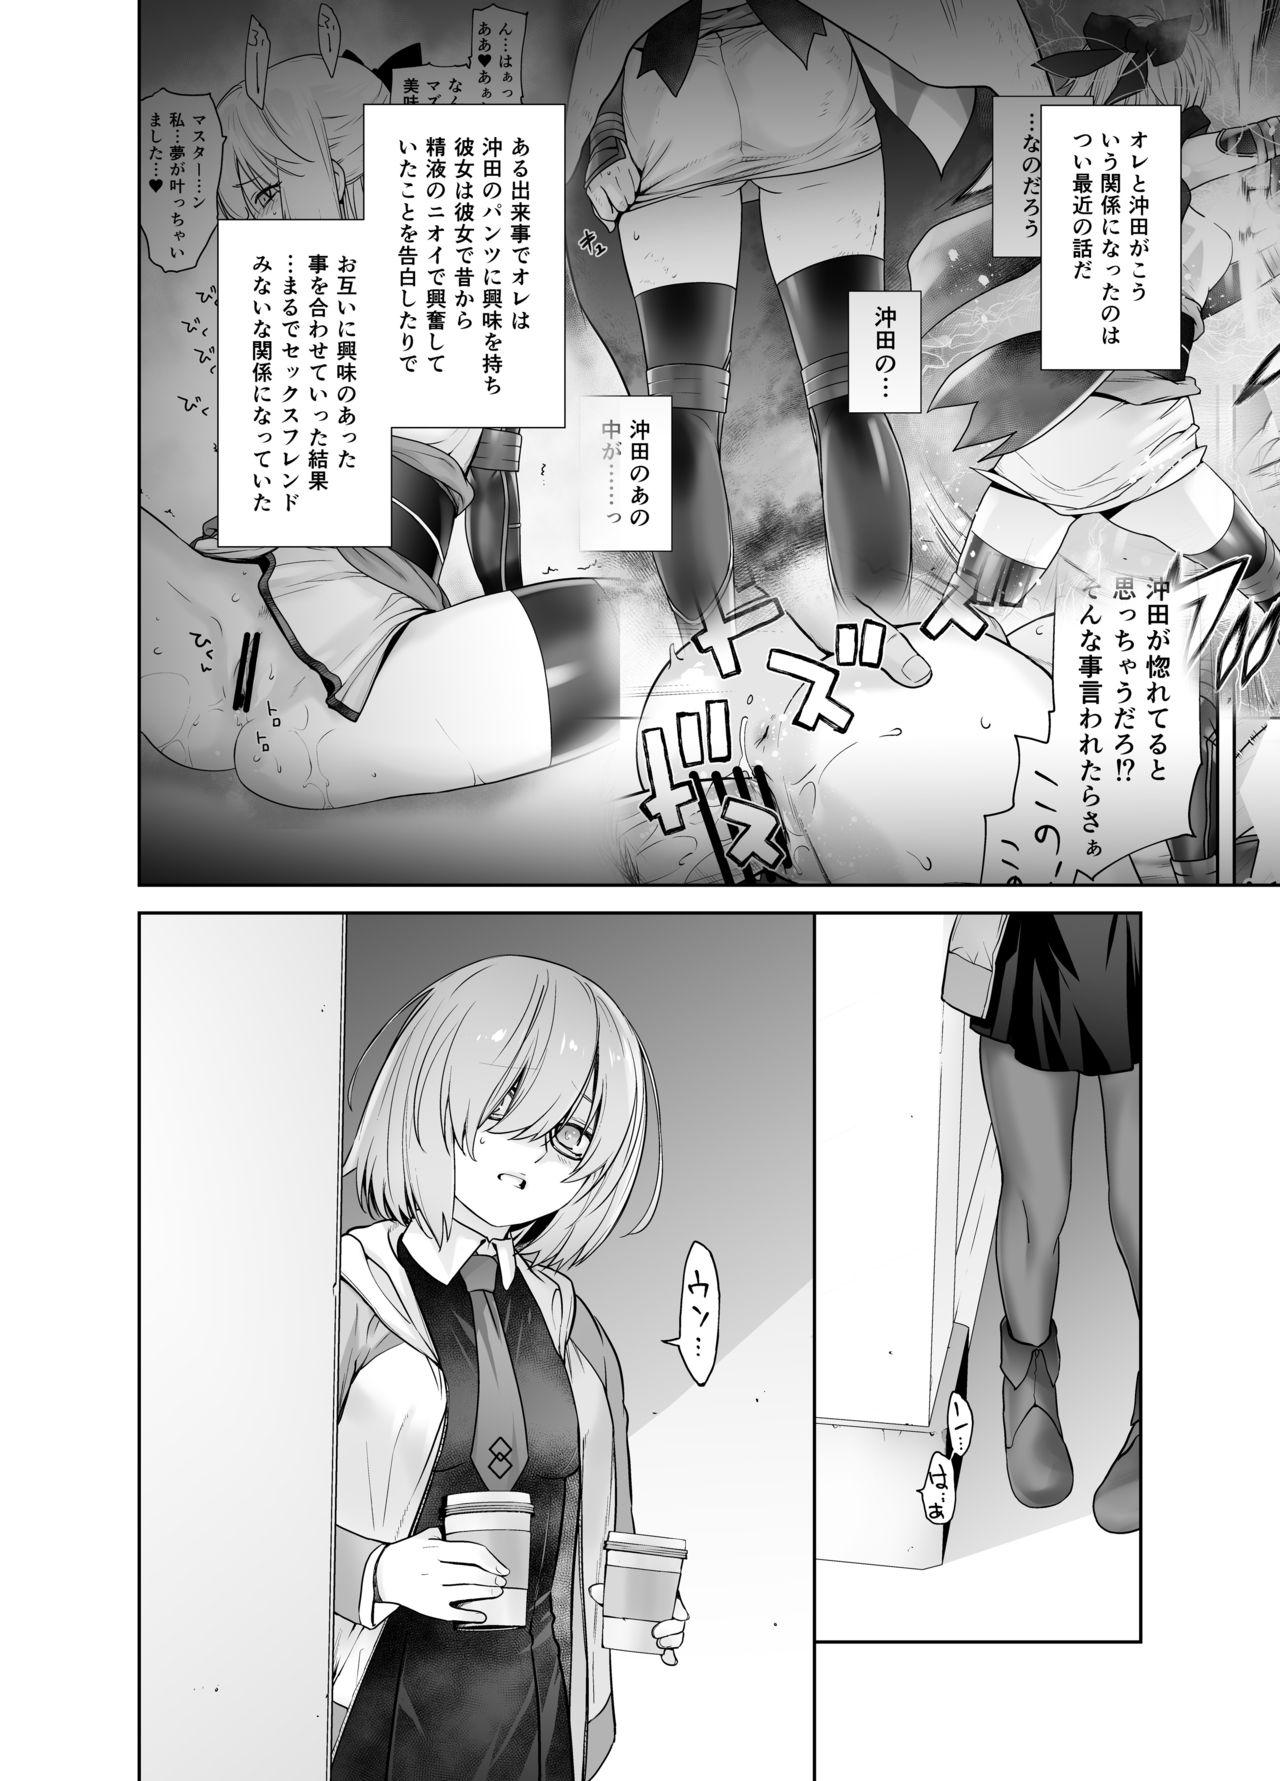 Euro HEAVEN'S DRIVE 2 - Fate grand order Hair - Page 7